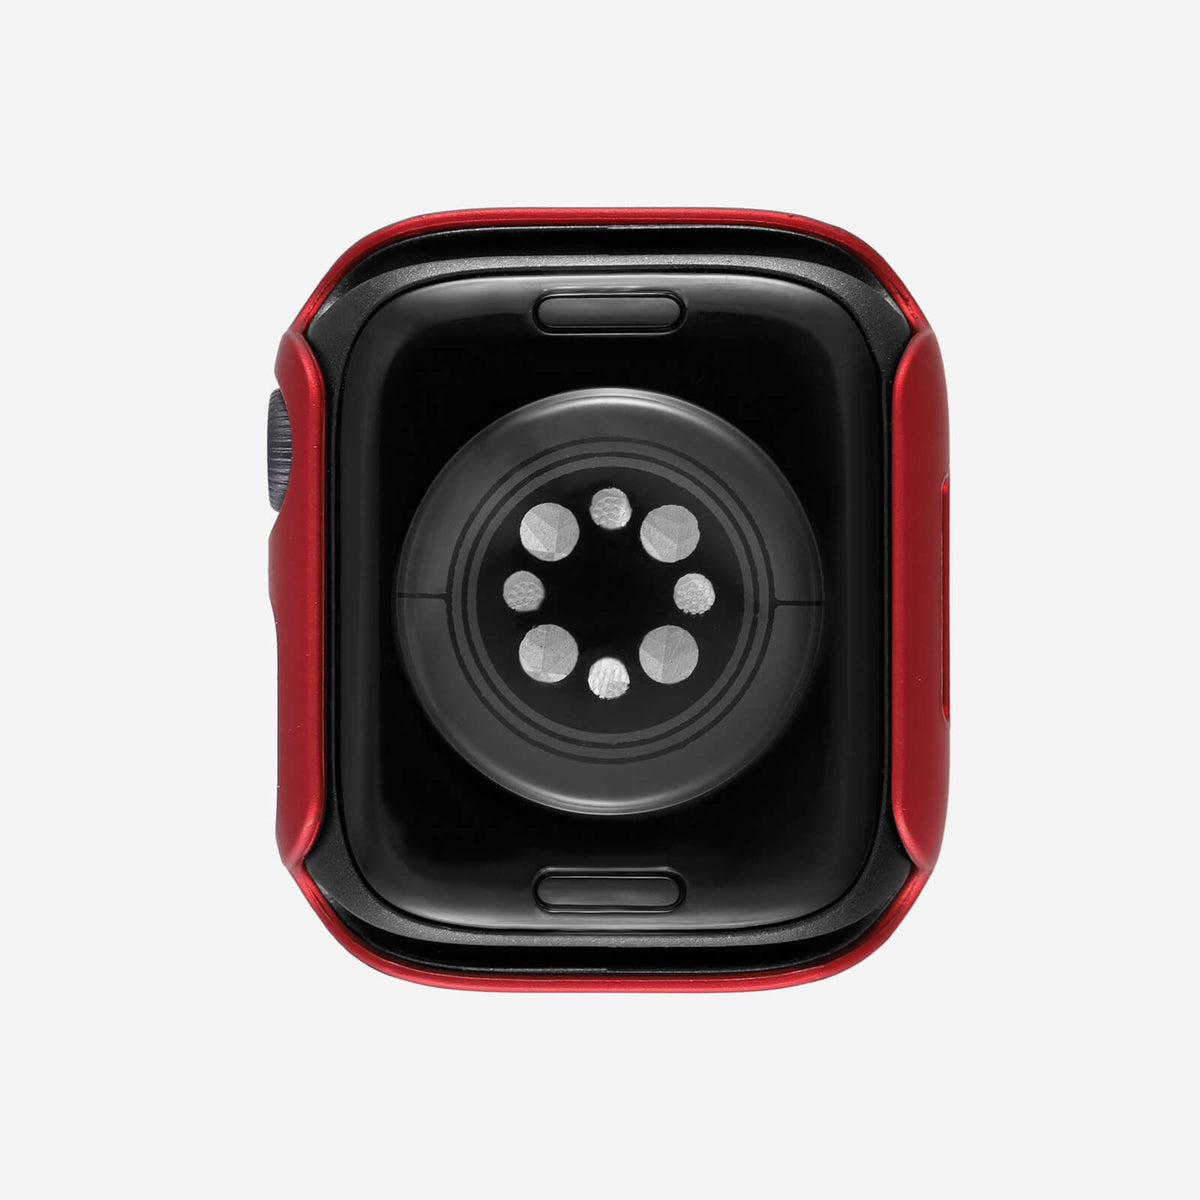 Apple Watch Slim Screen Protector Case - Chrome Red